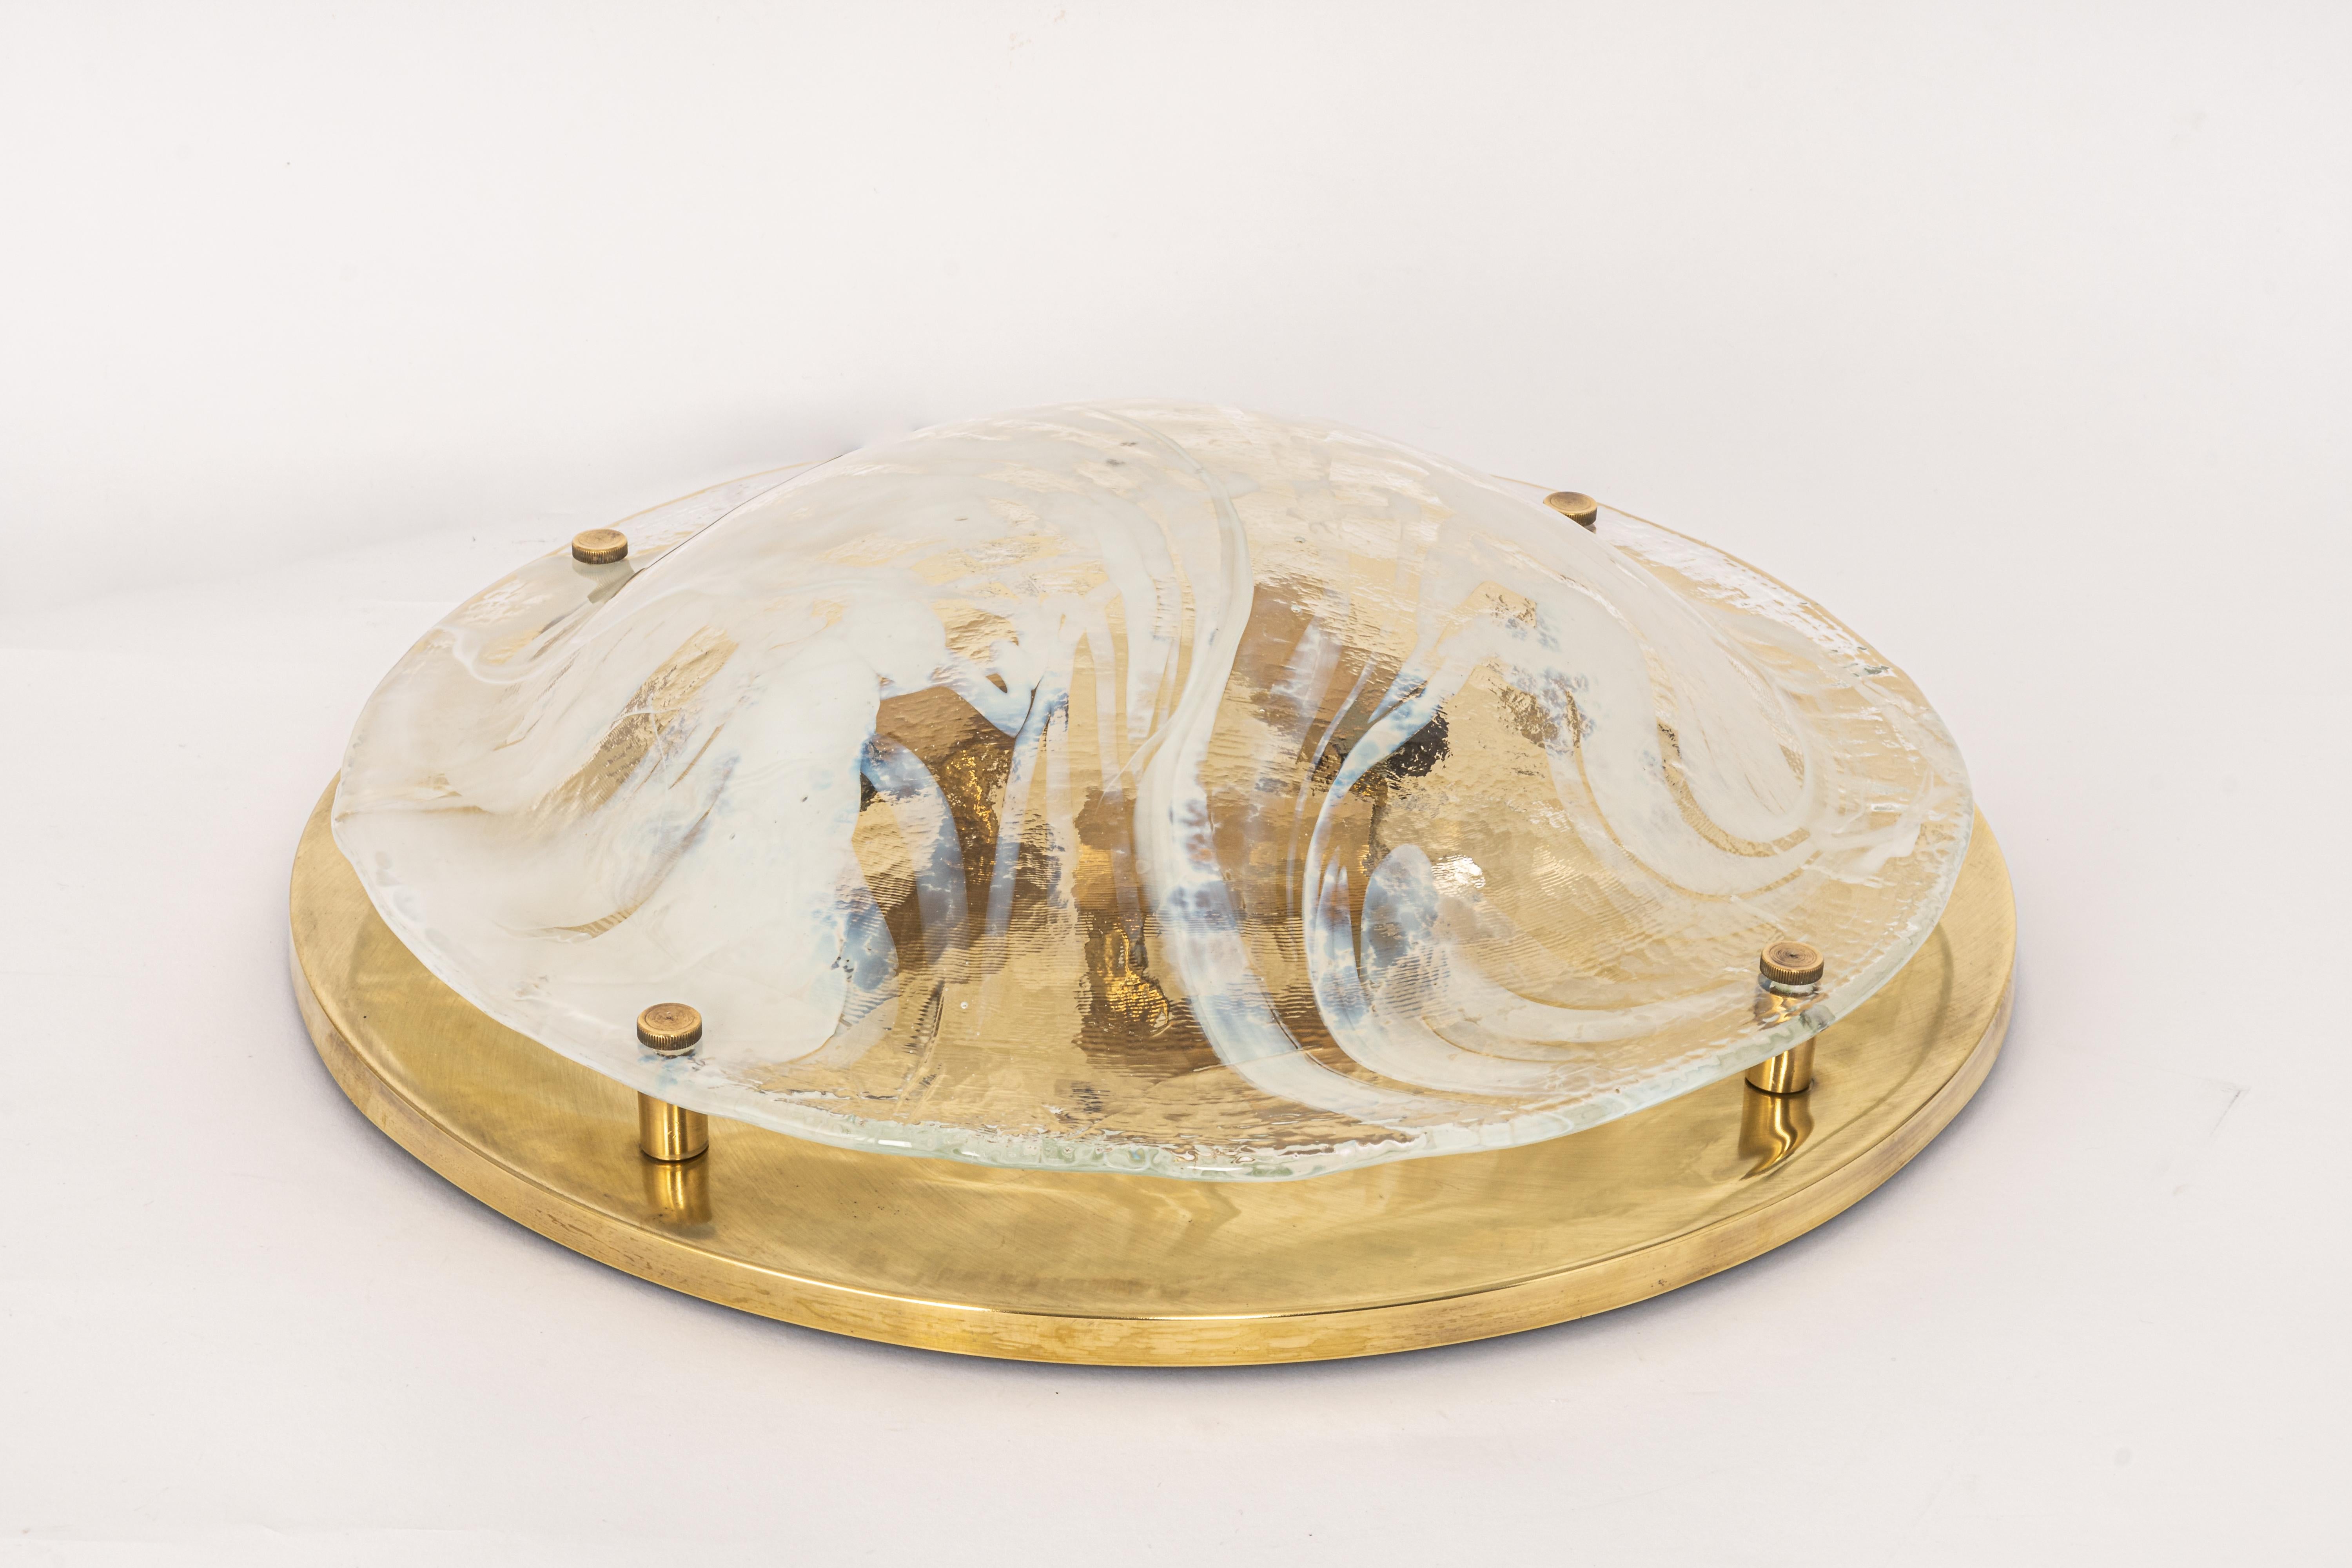 A wonderful round Murano flush mount by Hillebrand Leuchten, Germany, 1970s.
Thick blown glass fixtured on a brass base.

High quality and in very good condition. Cleaned, well-wired and ready to use. 

The fixture requires 3 x E14 Standard